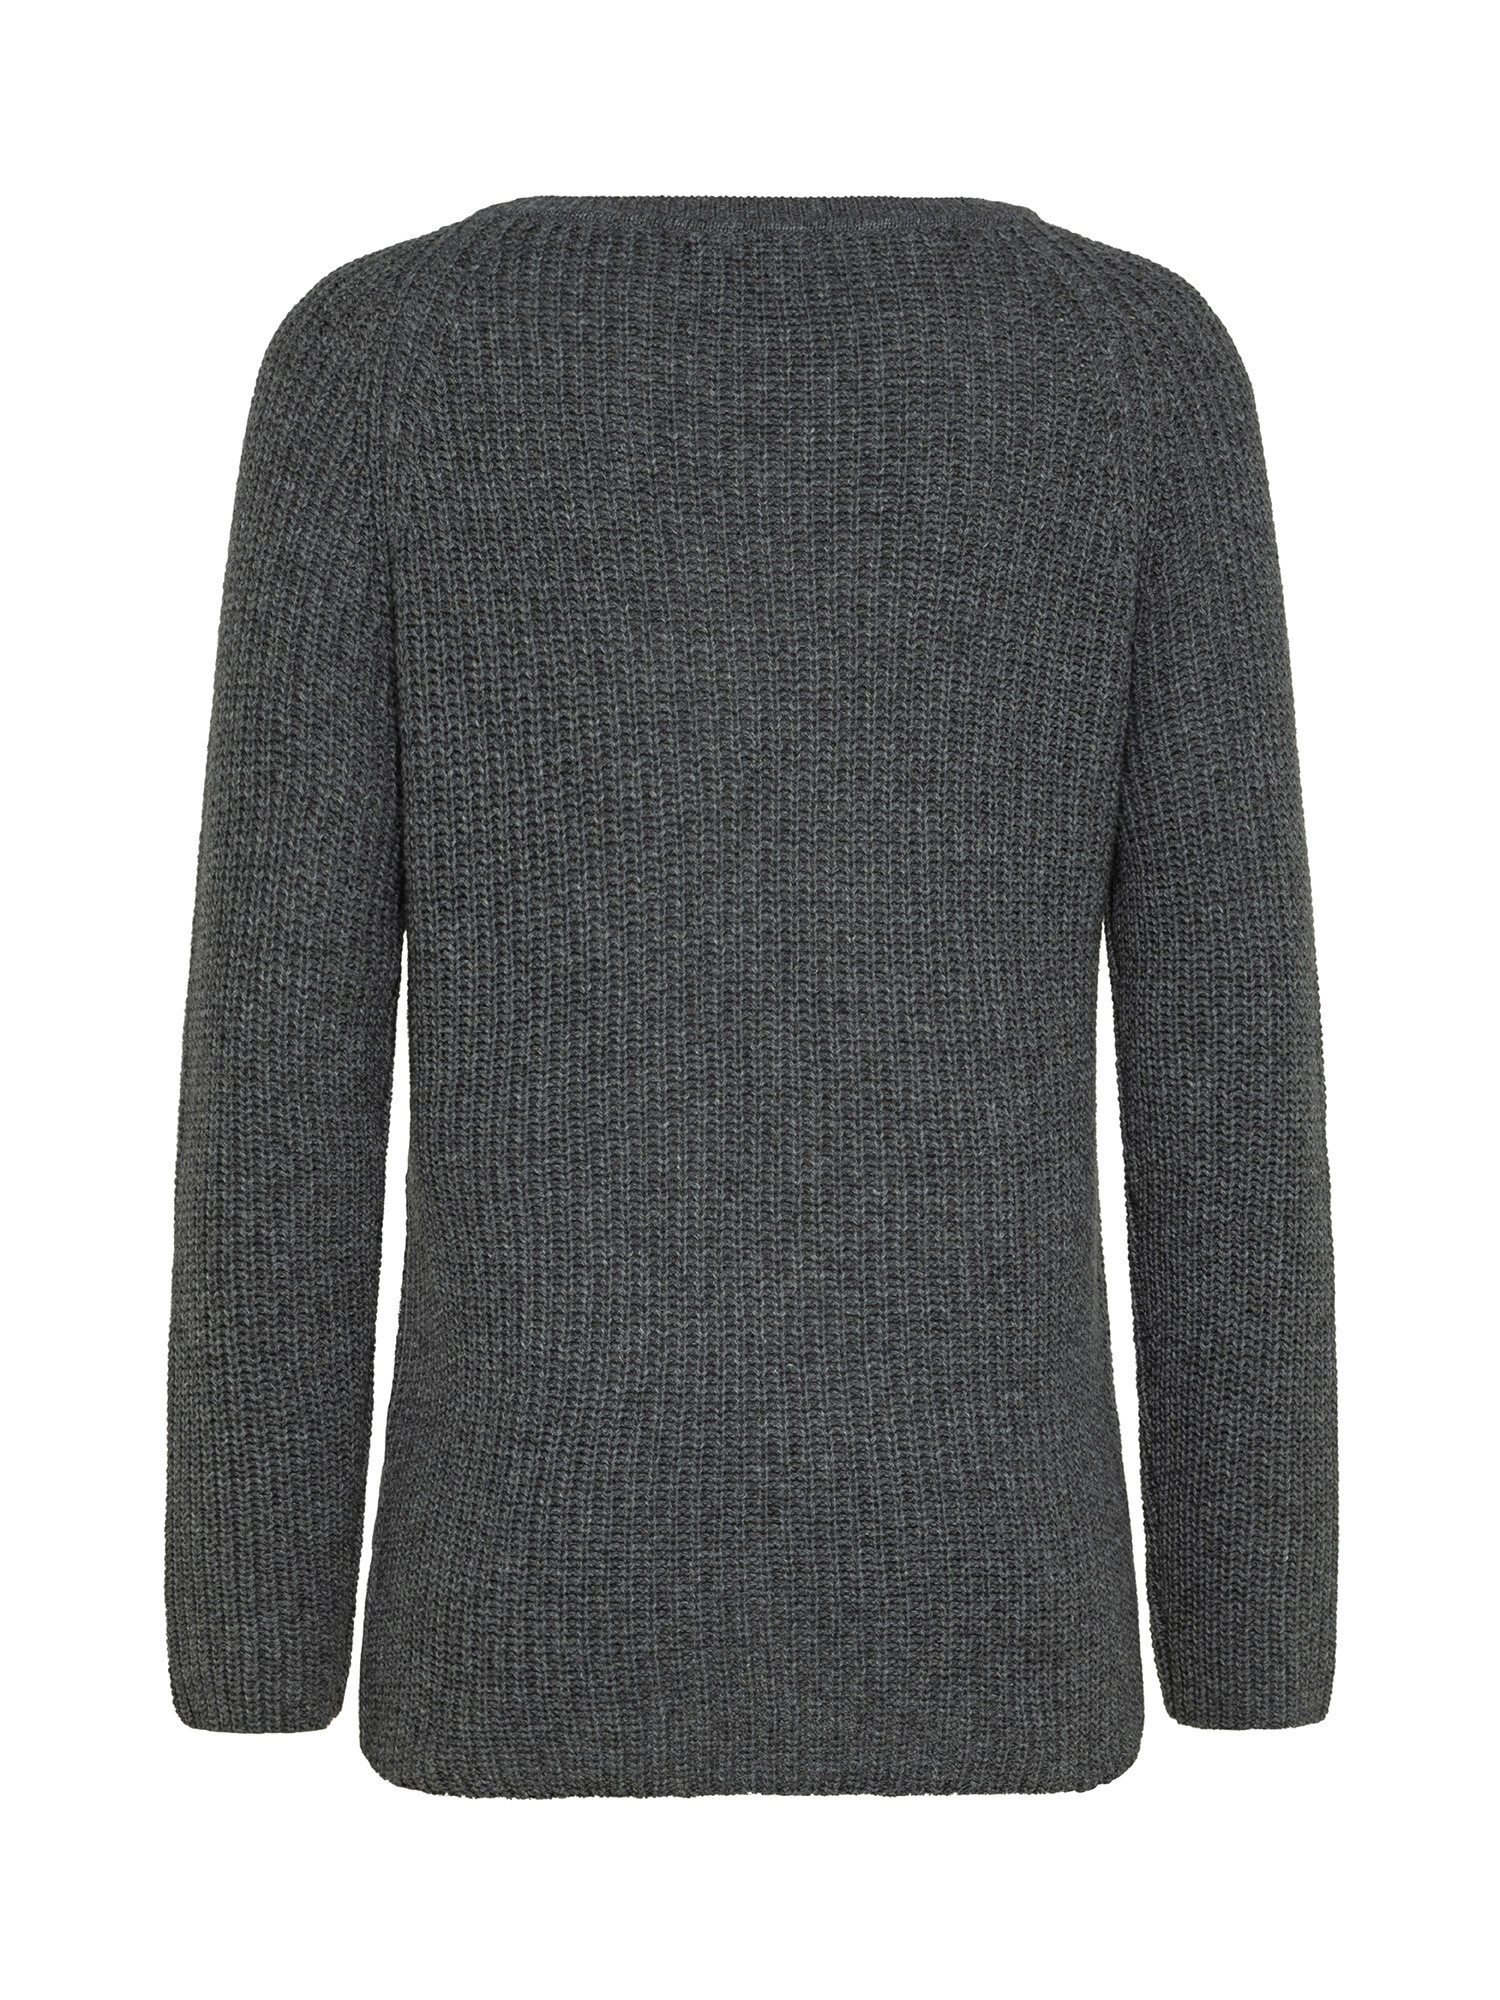 Koan - Ribbed pullover with boat neckline, Grey, large image number 1